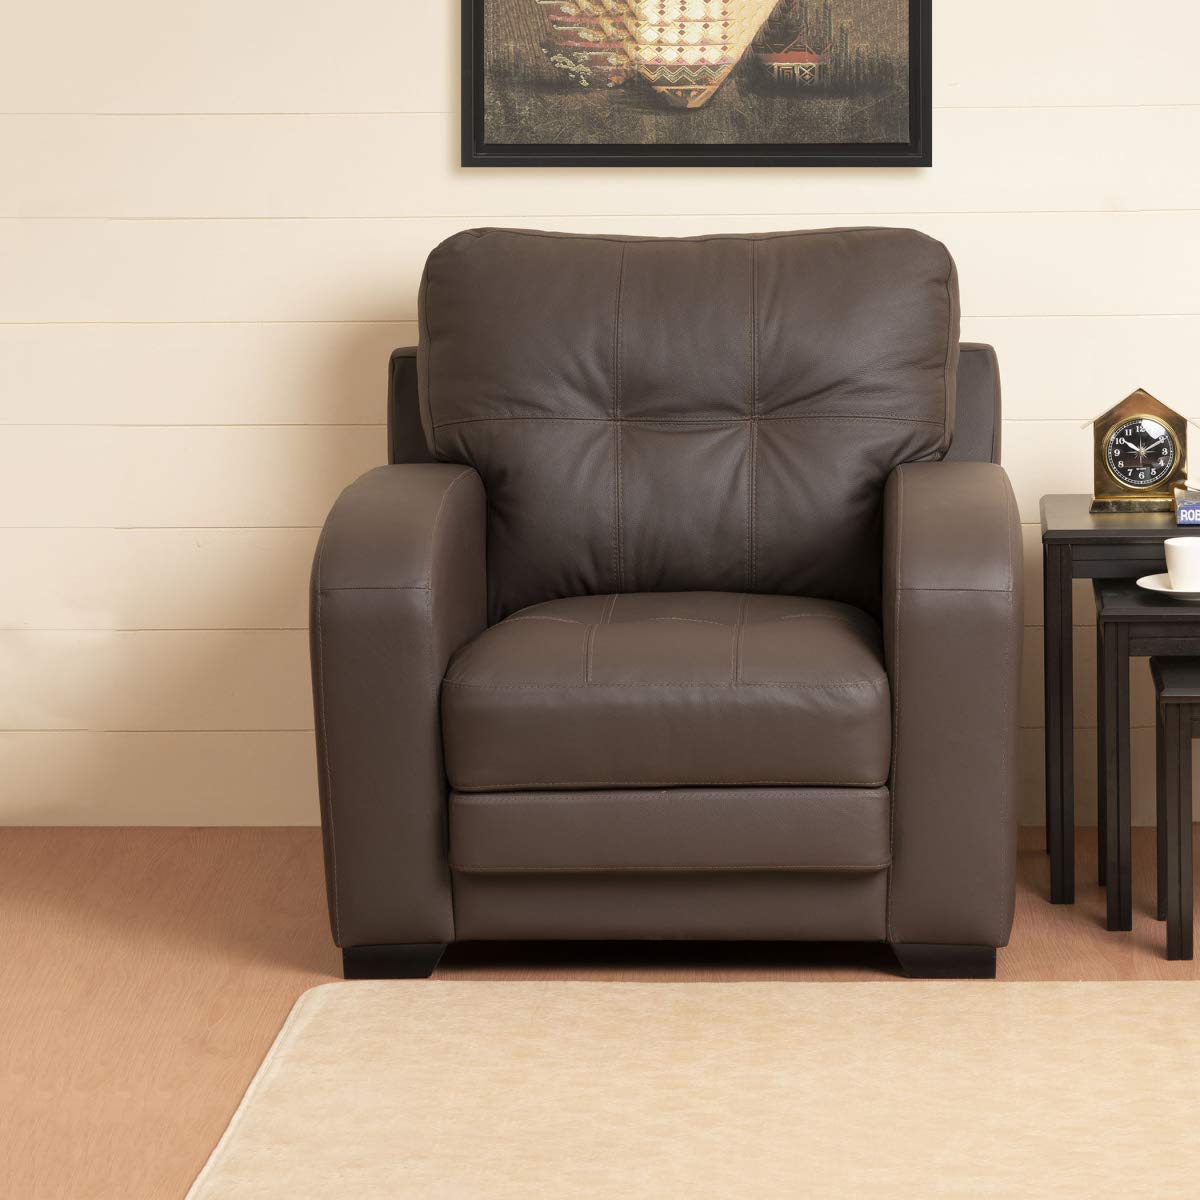 Home Centre Vista One Seater Armchair (Brown)